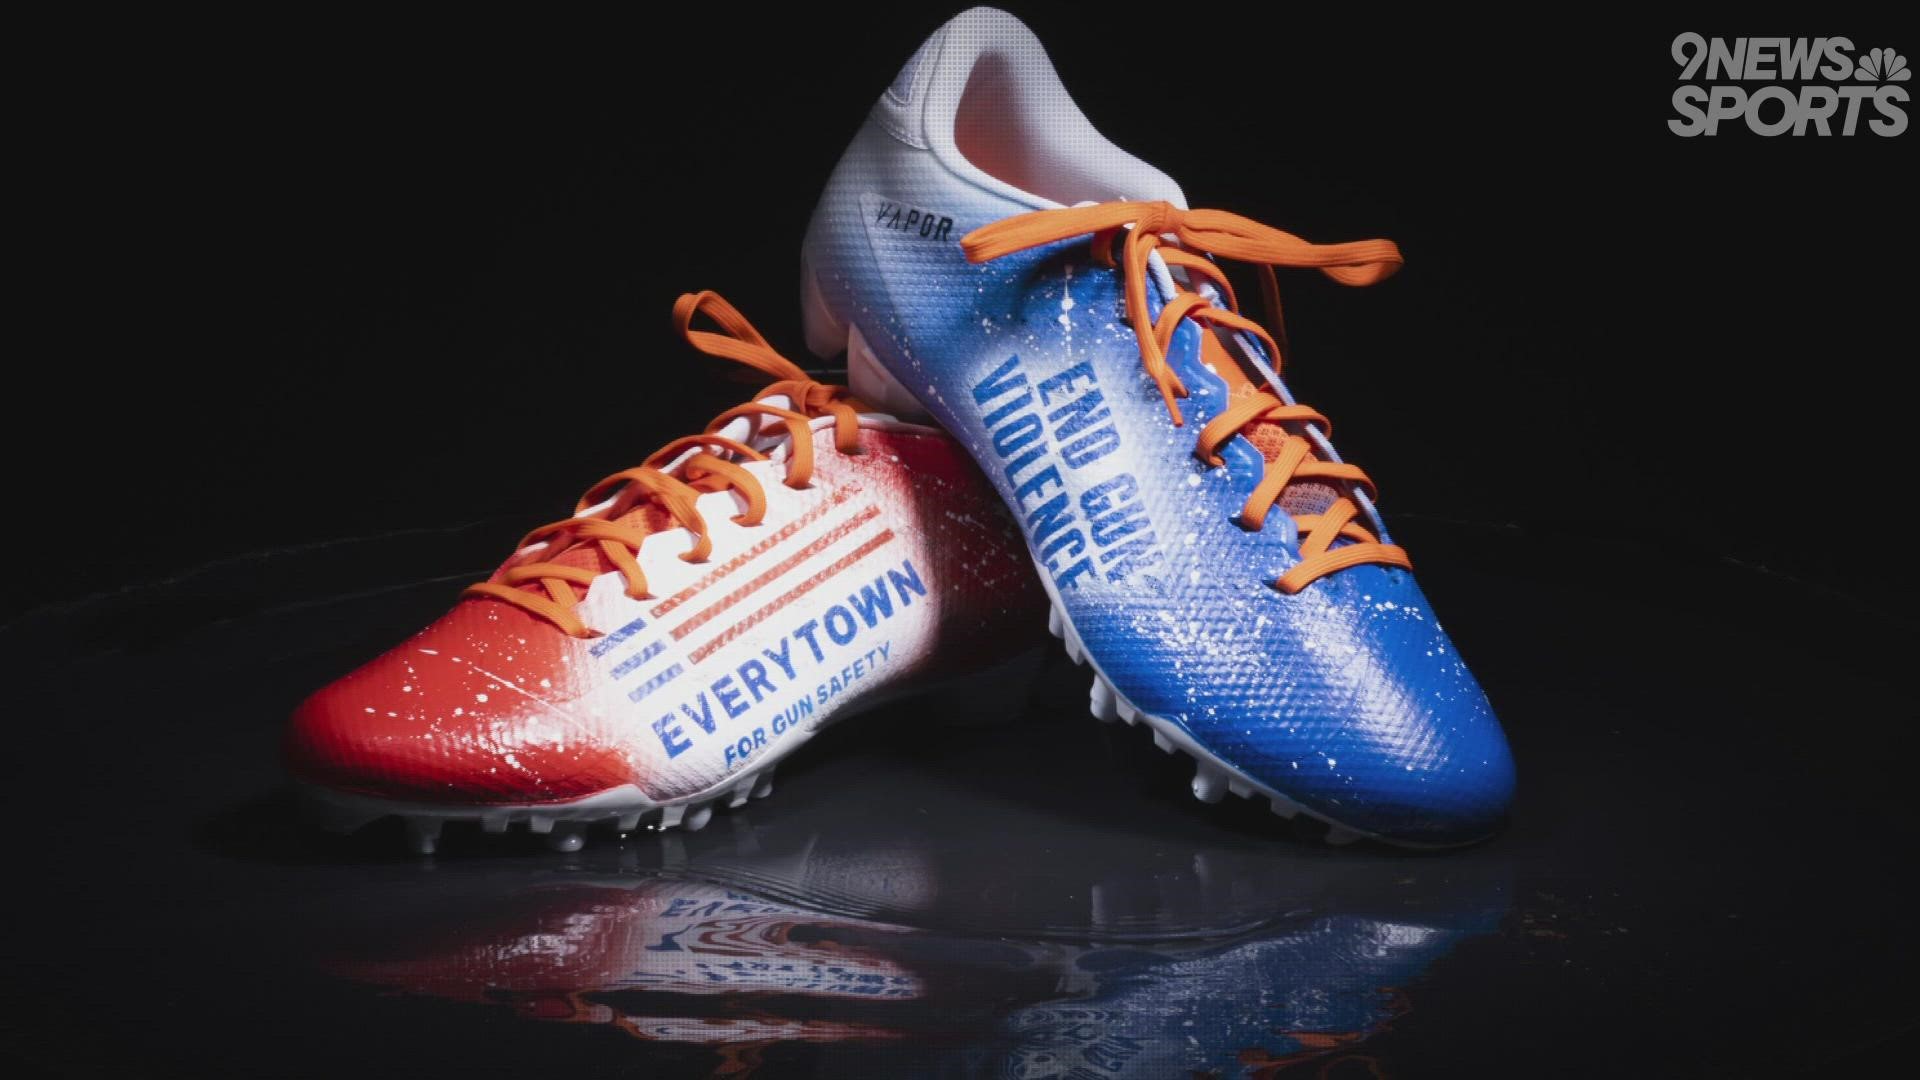 The NFL's "My Cause My Cleats" initiative aims to raise awareness for various causes and non-profit organizations.